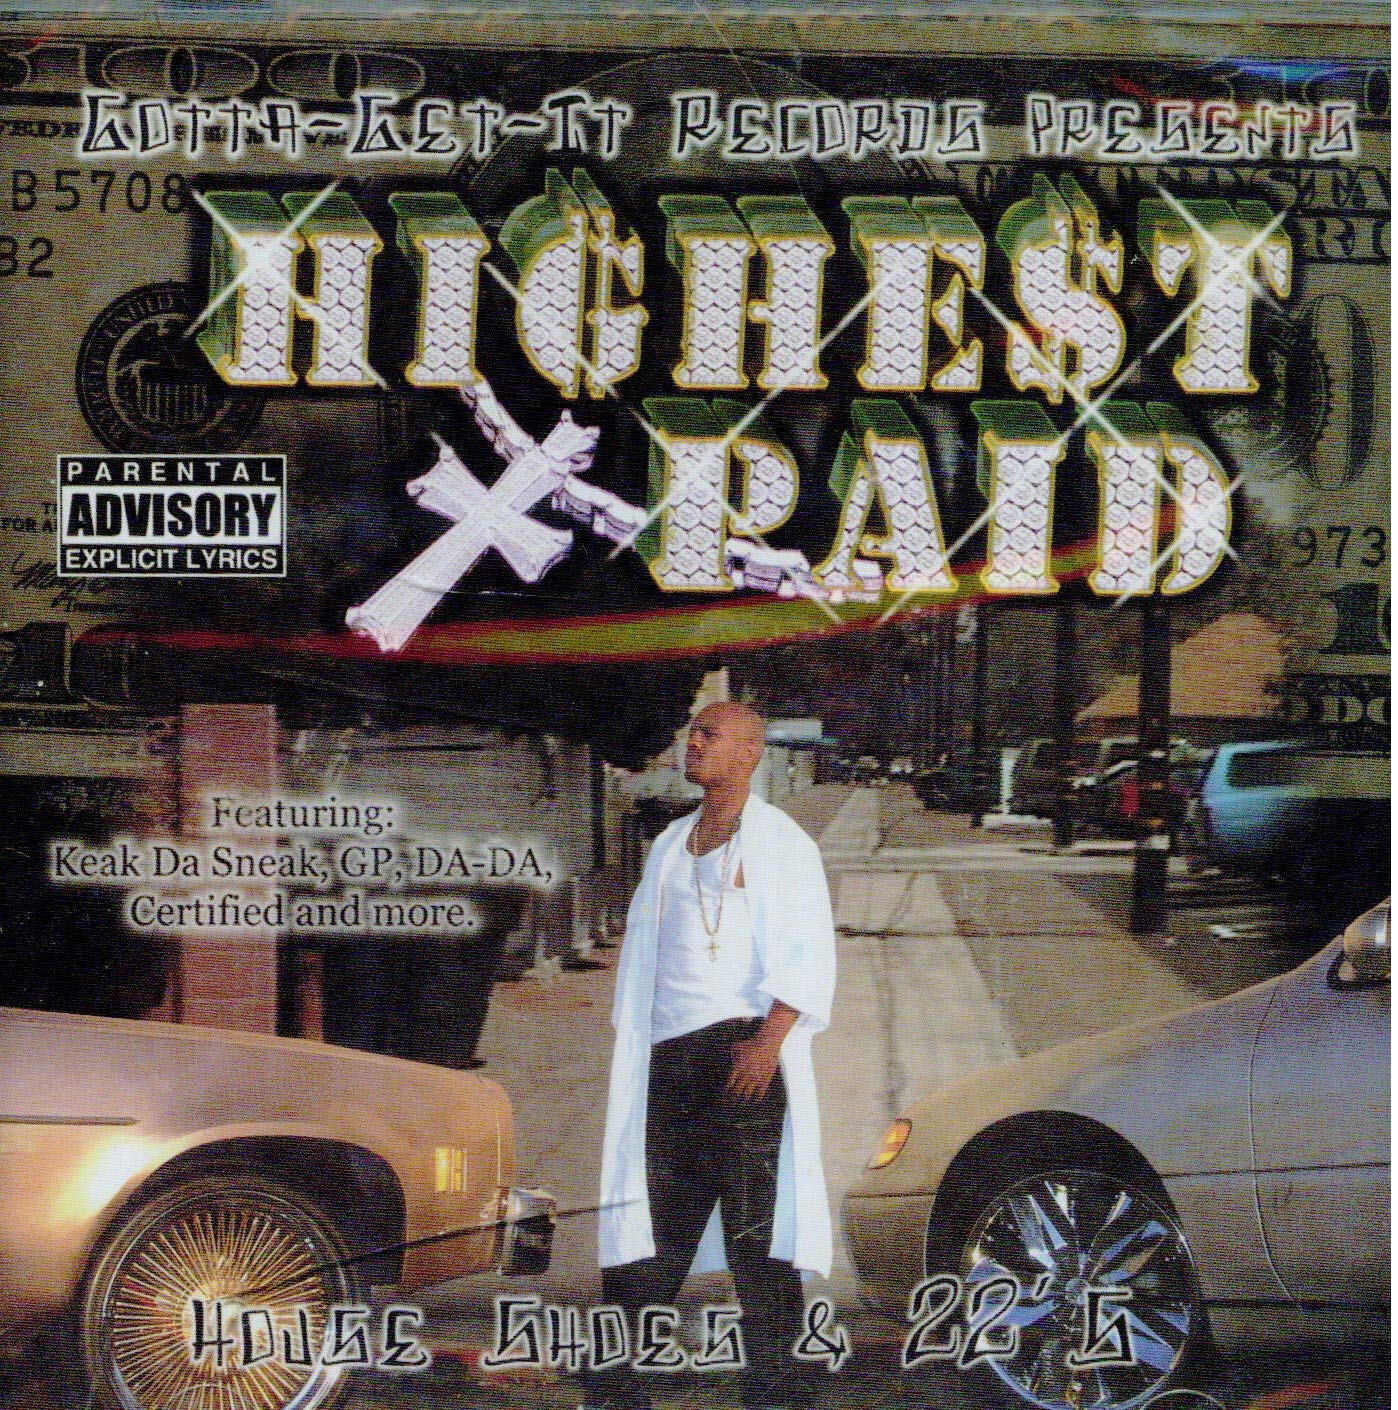 Highest Paid - House Shoes & 22's (2002) FLAC Download